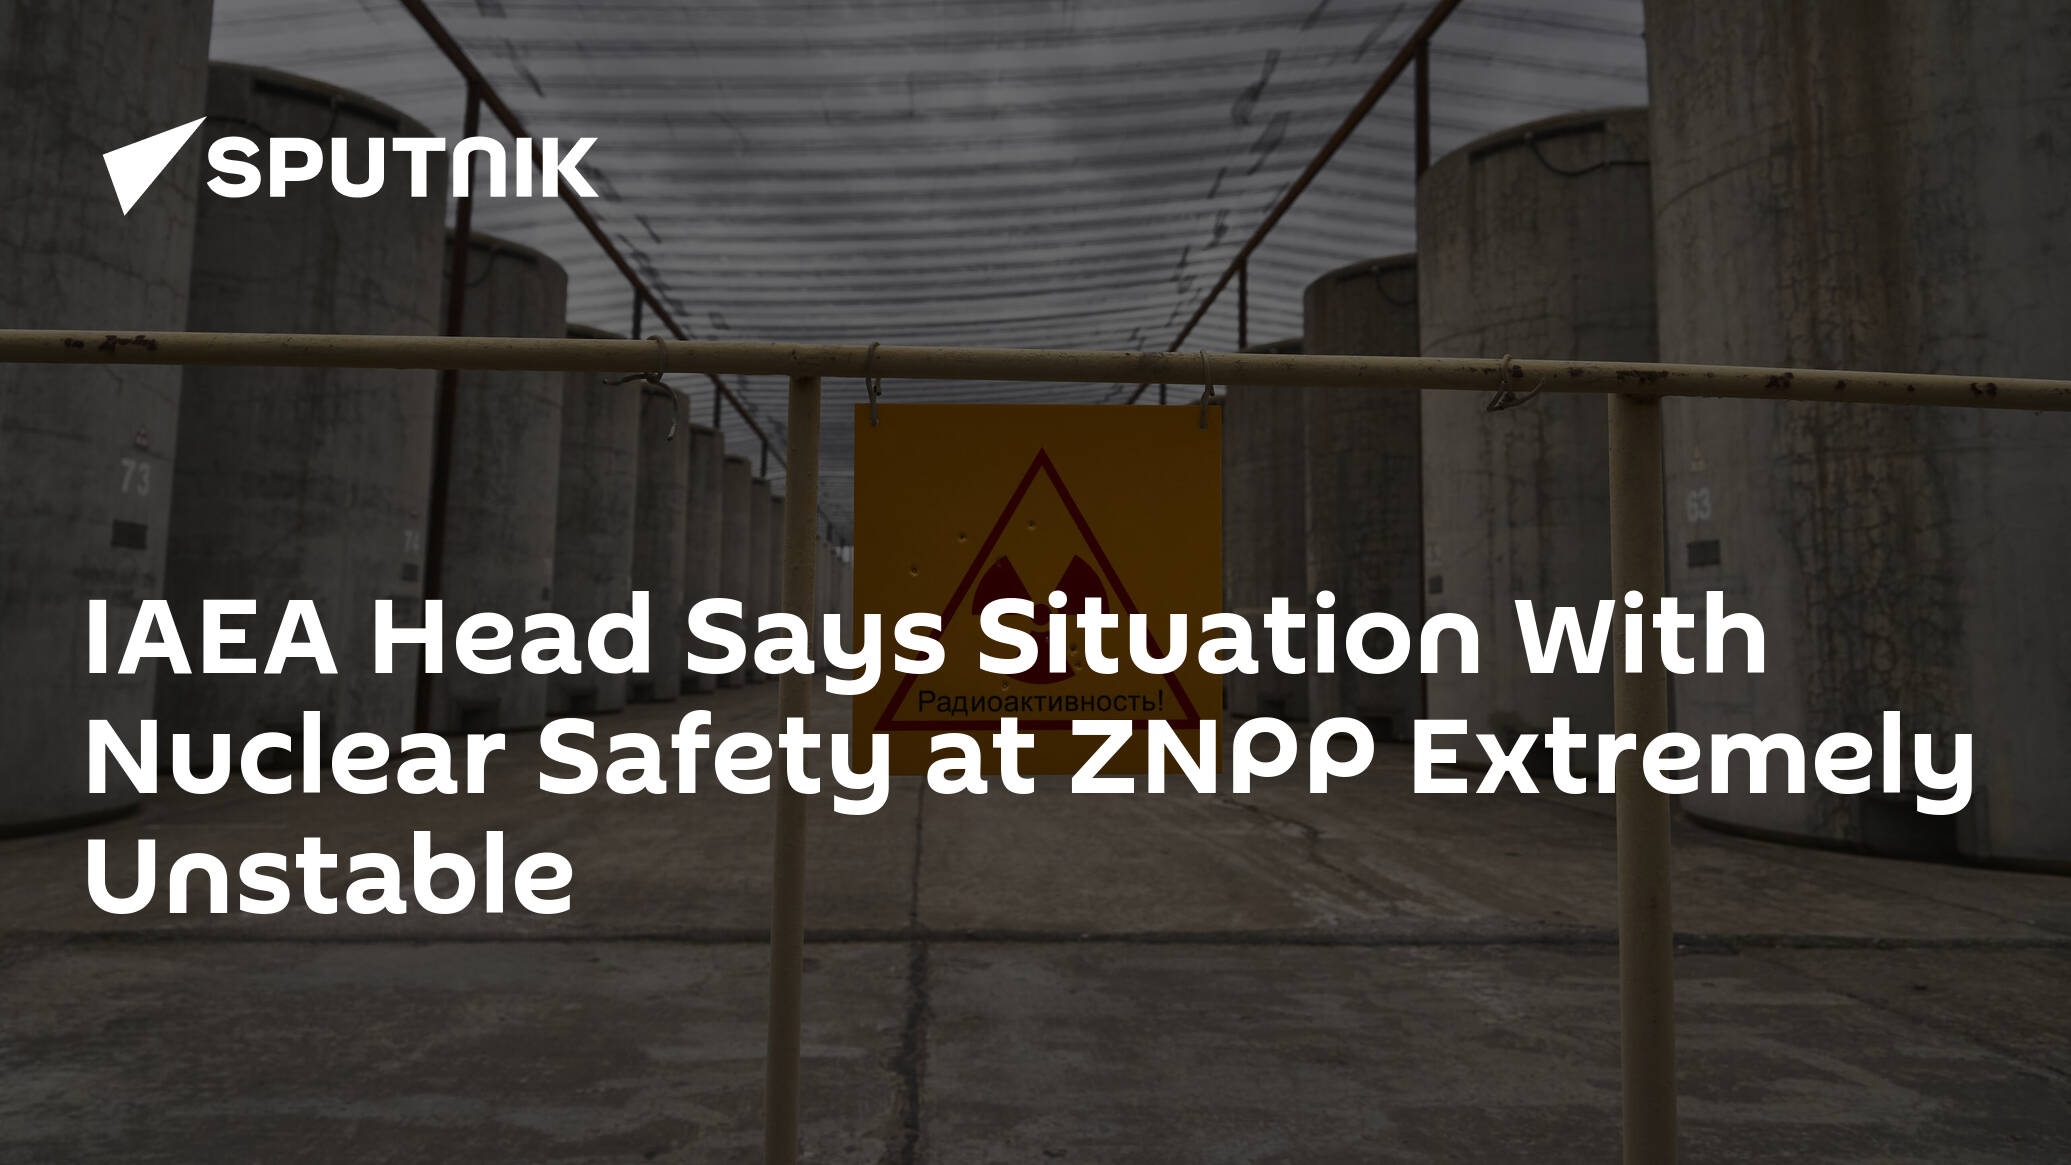 IAEA Head Says Situation With Nuclear Safety at ZNPP Extremely Unstable